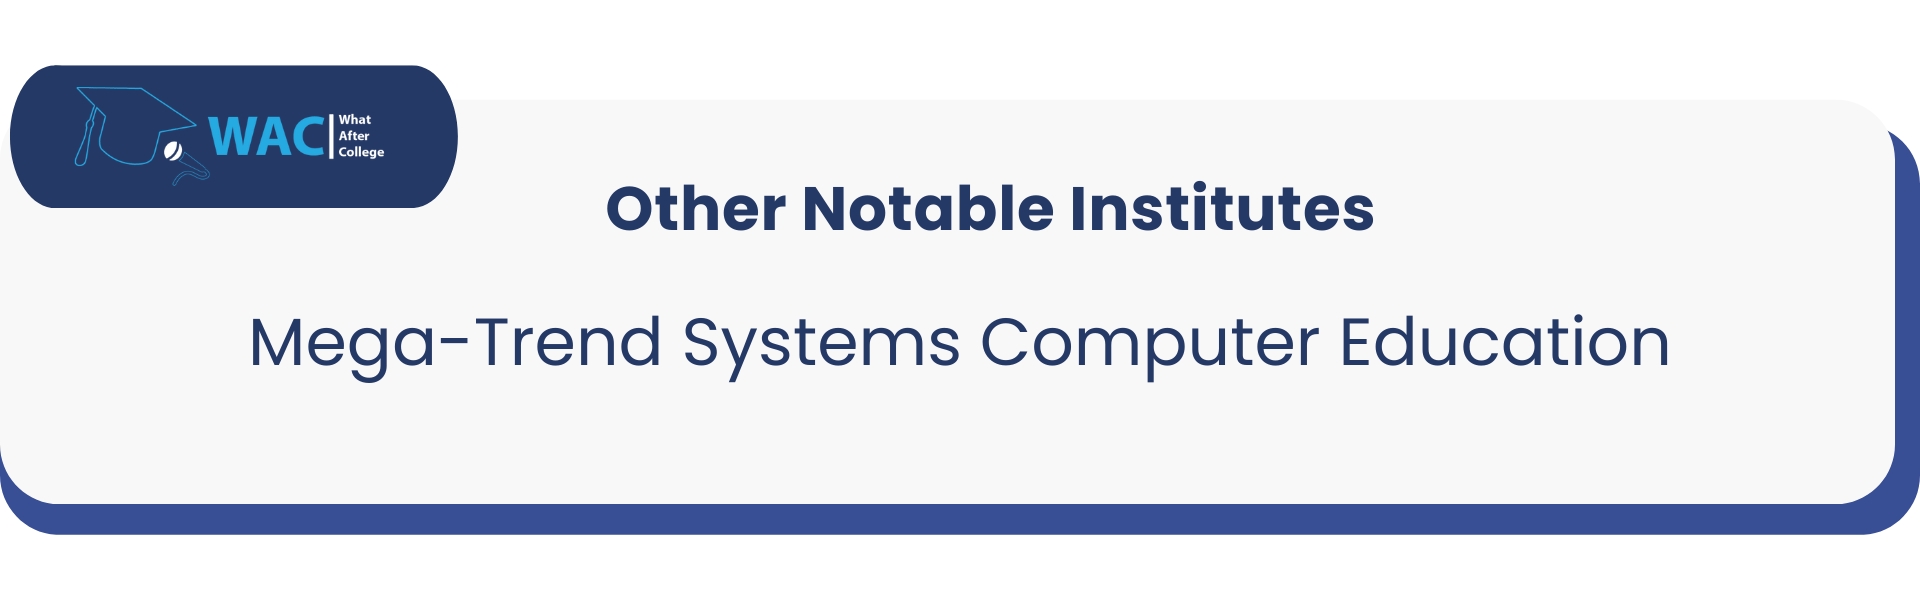 Mega-Trend Systems Computer Education